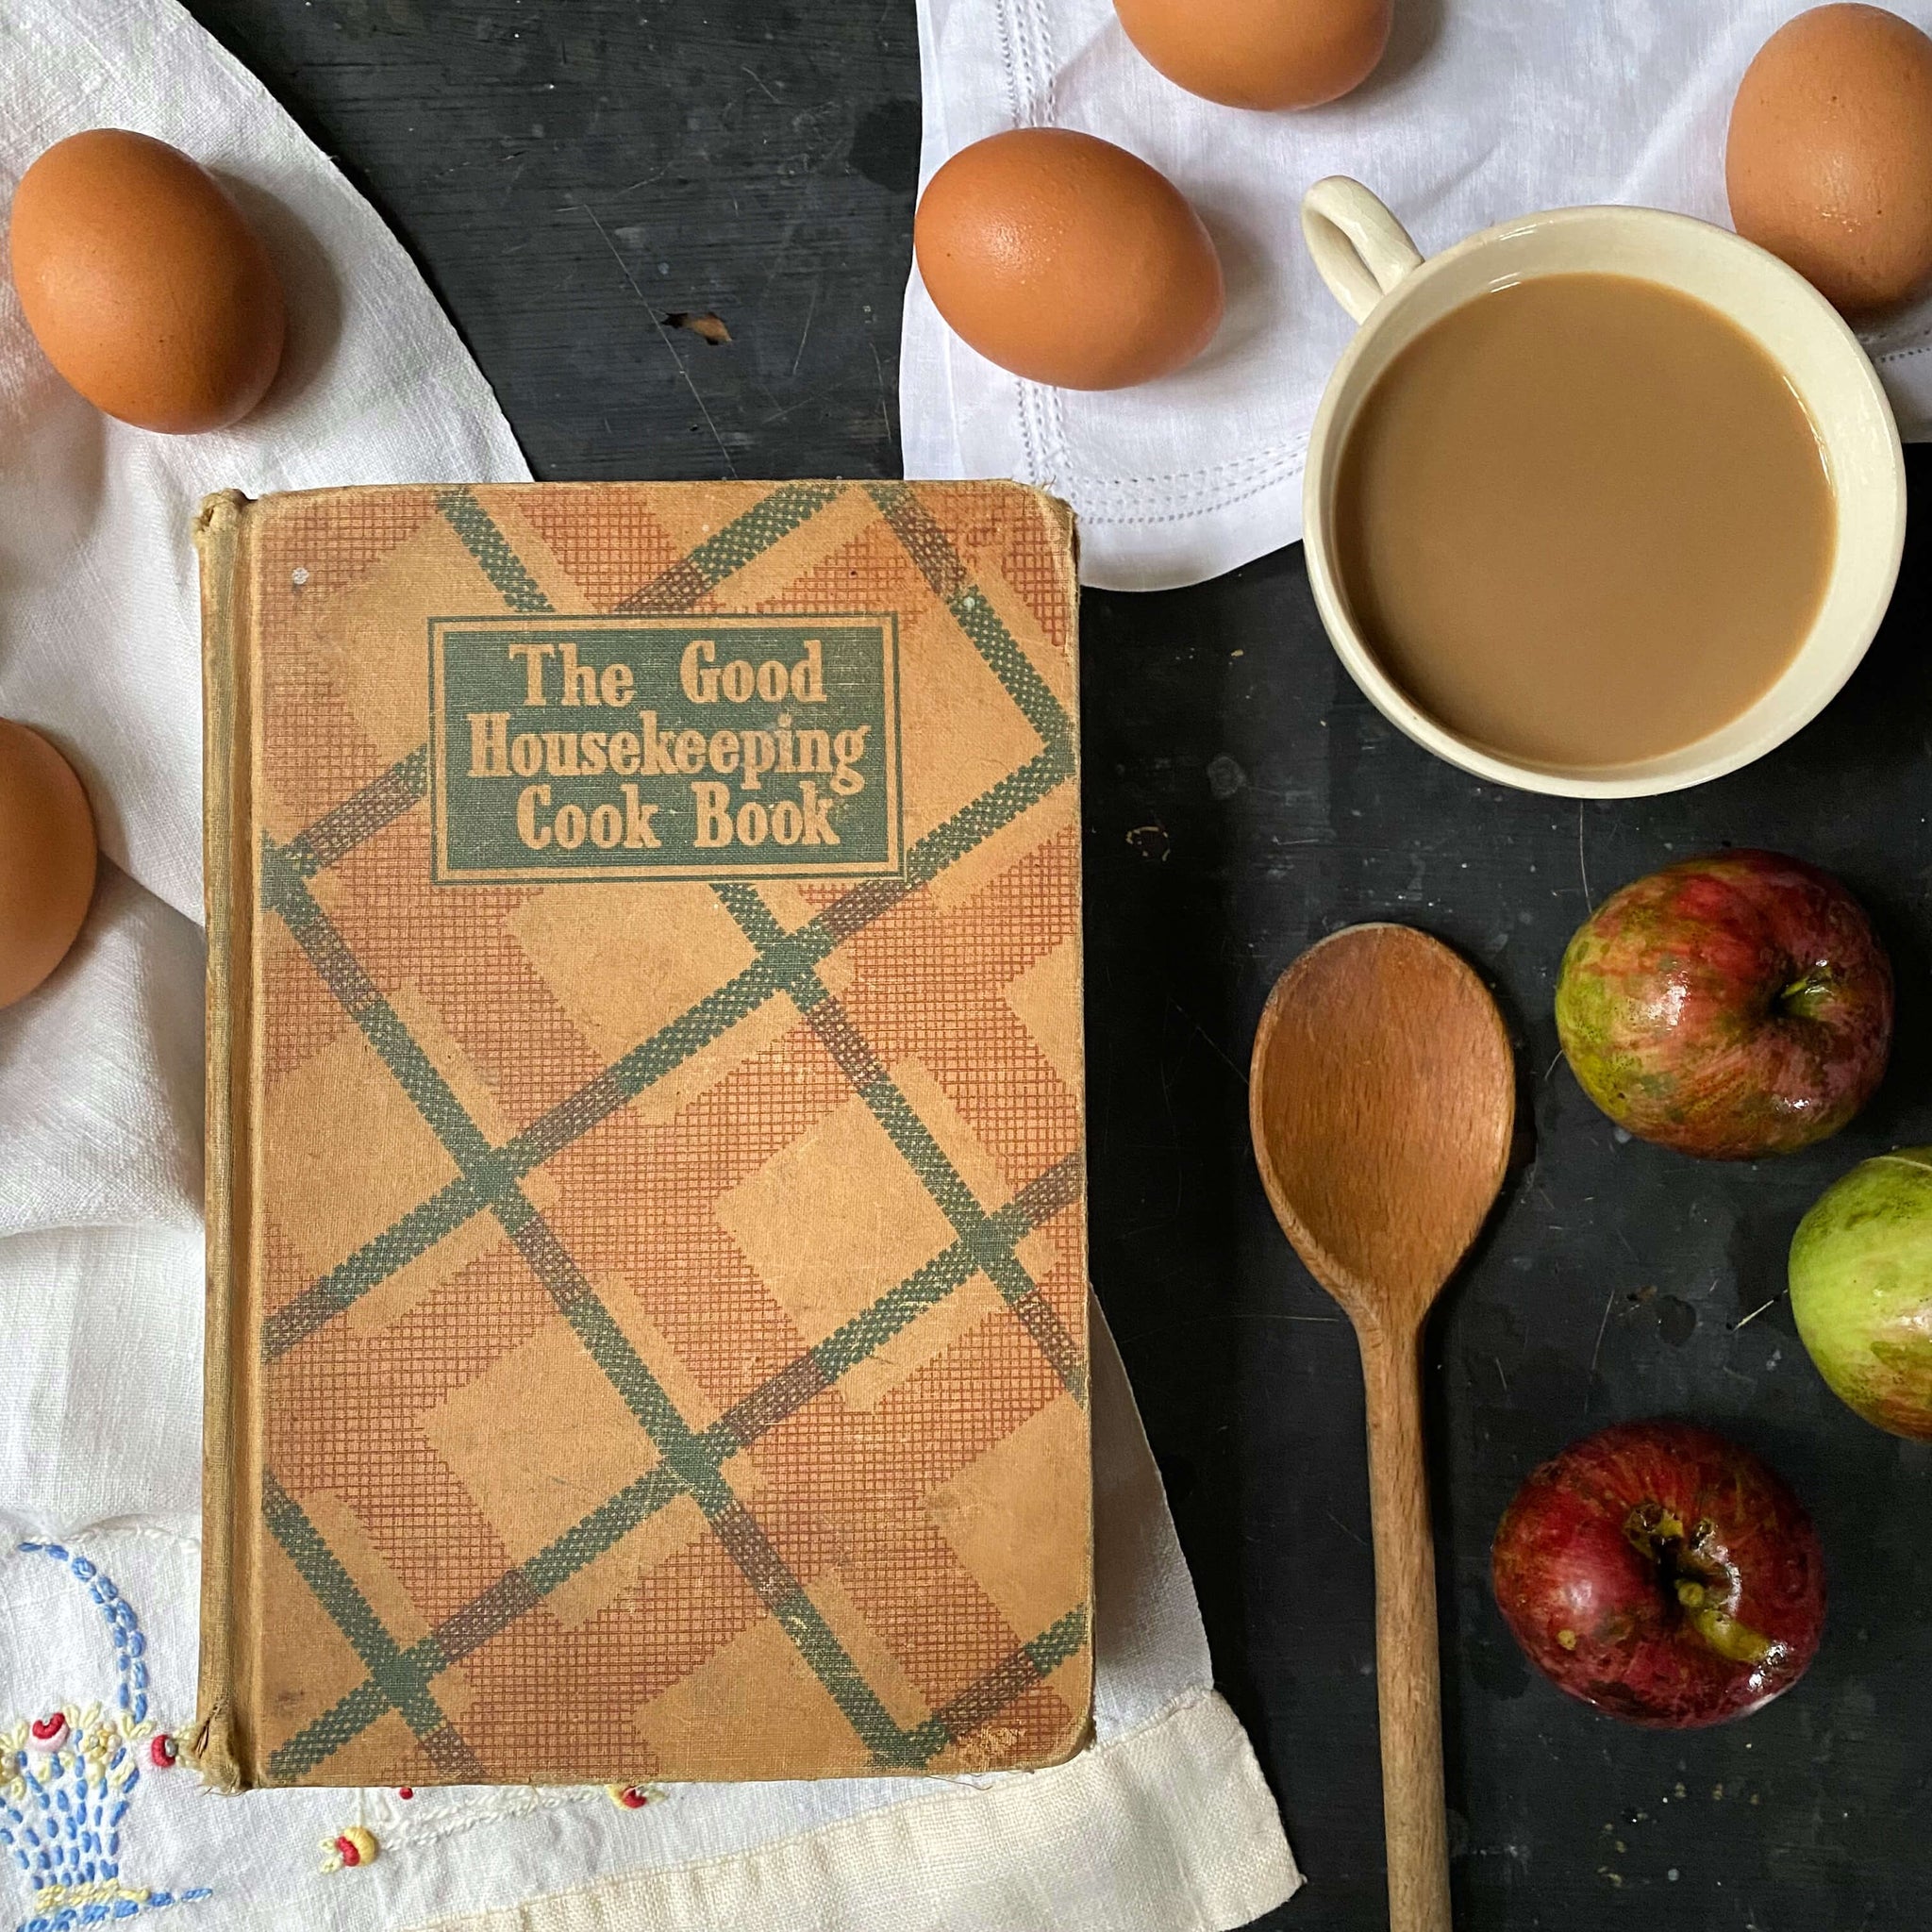 The Good Housekeeping Cook Book -1943 Wartime Edition with